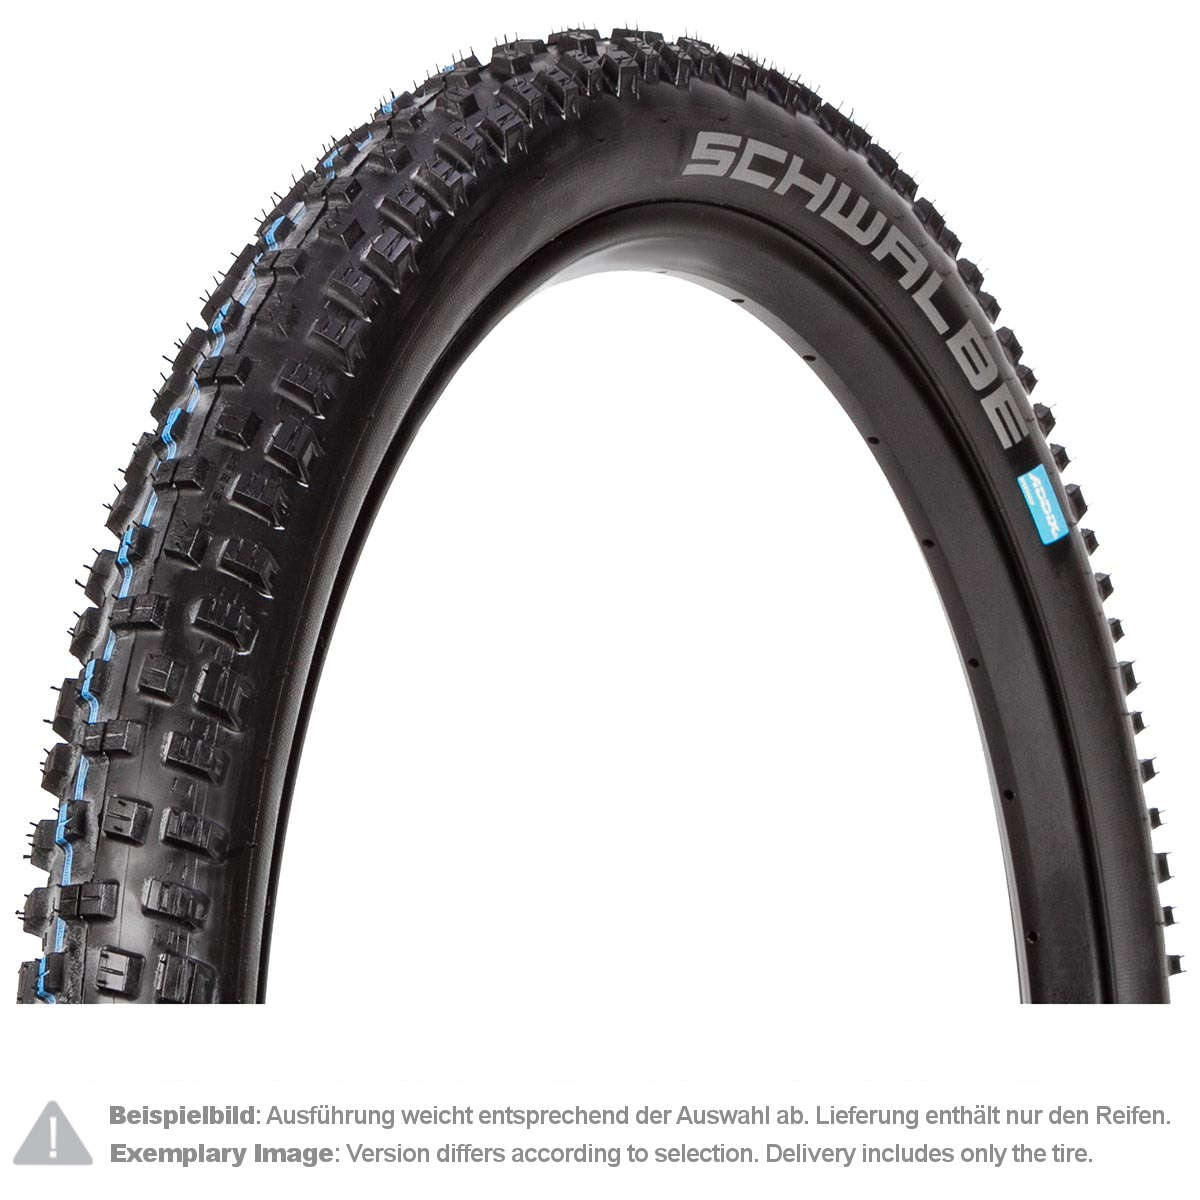 Schwalbe MTB Tire Nobby Nic HS 463 Black, 29 x 2.35 Inches, SnakeSkin, Tubeless Easy, Addix Performance, Foldable